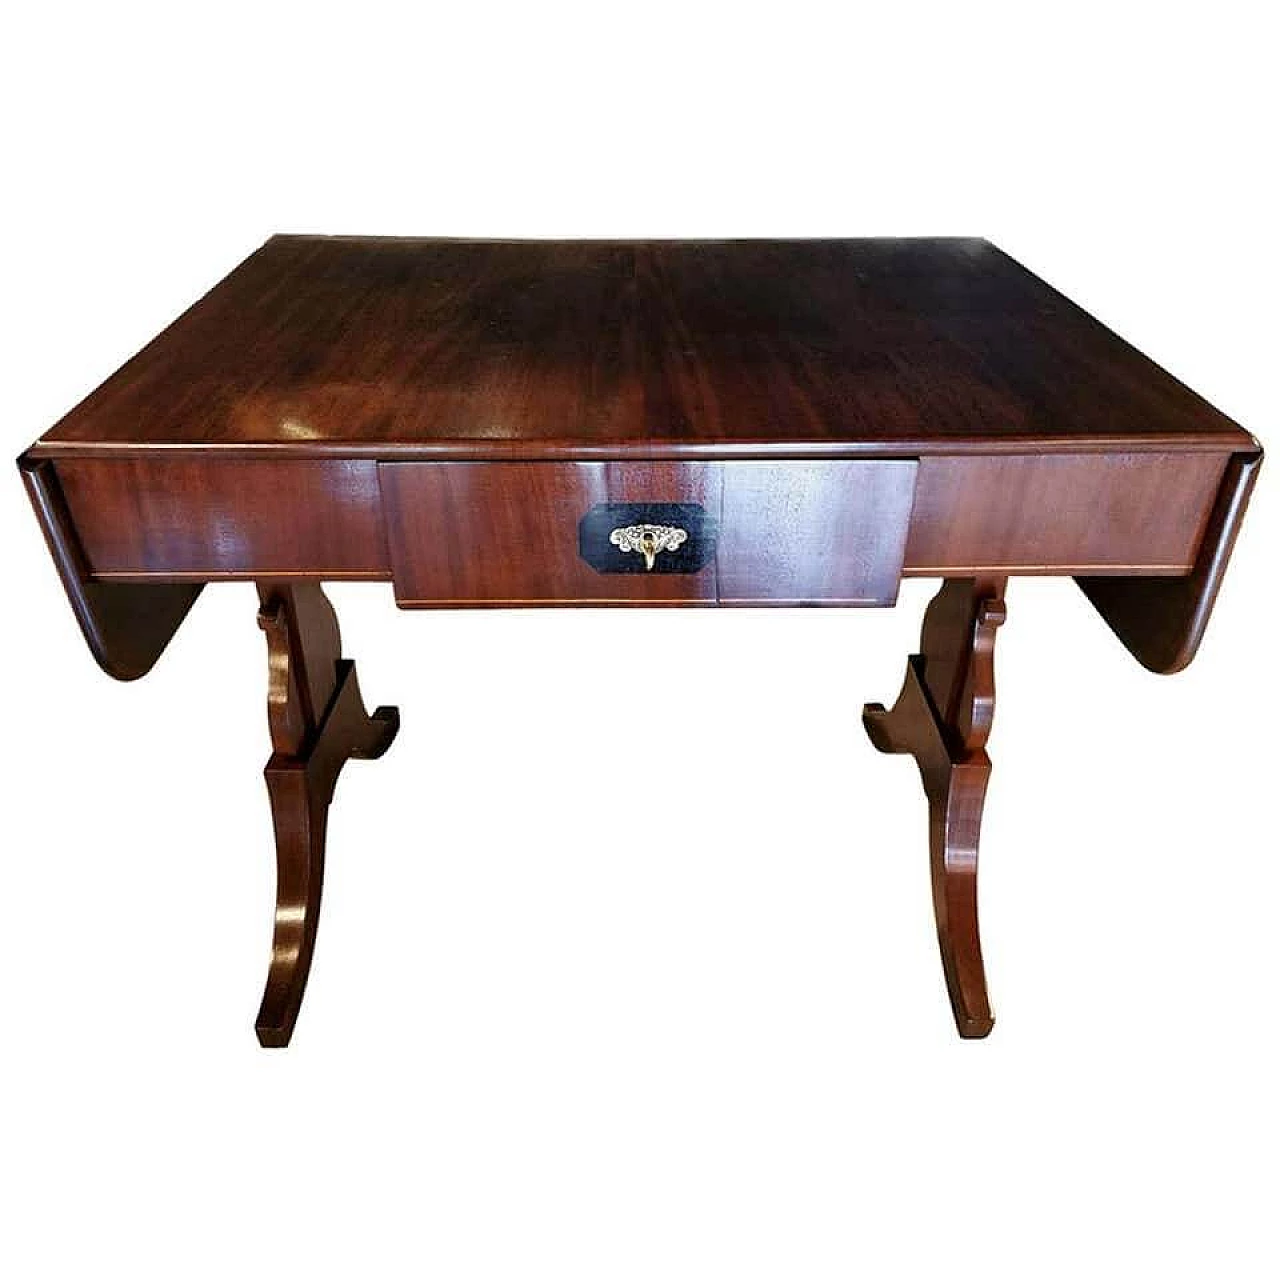 Biedermaier writing table in mahogany and light birch wood inlays, 19th century 1186587